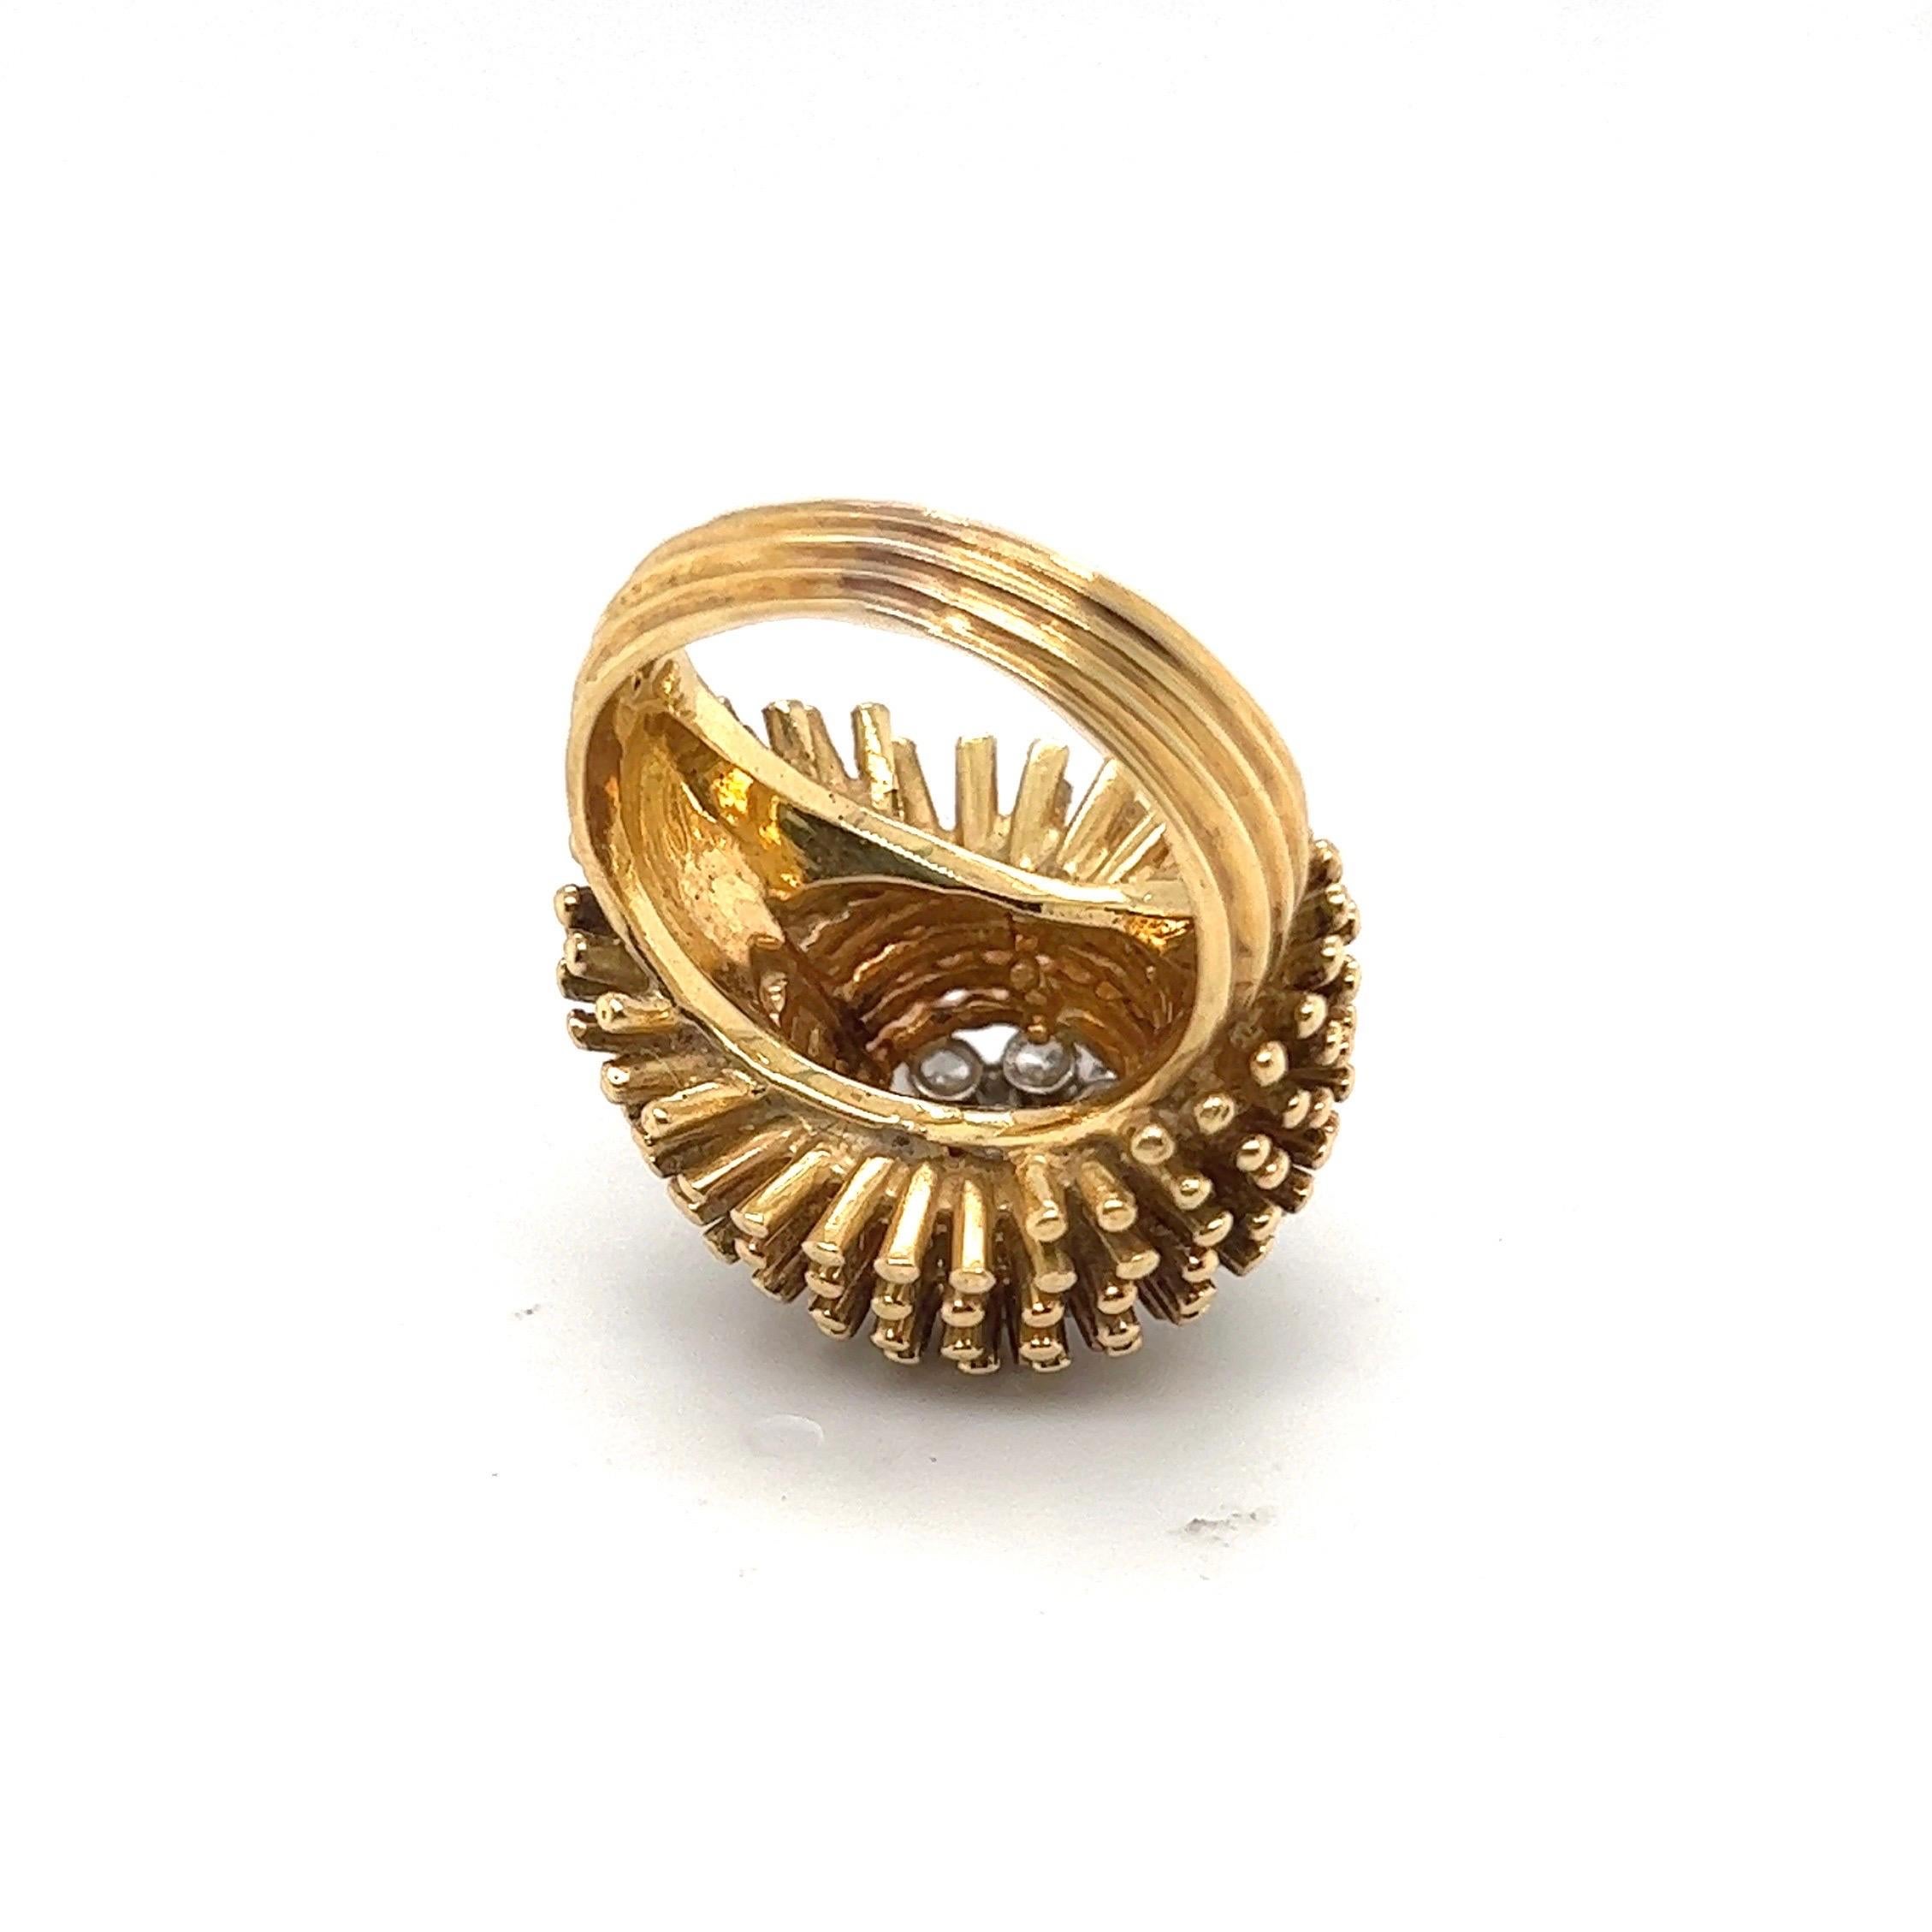 Brilliant Cut 18 Karat Yellow Gold and Diamonds Cocktail Ring by Kutchinsky, 1965